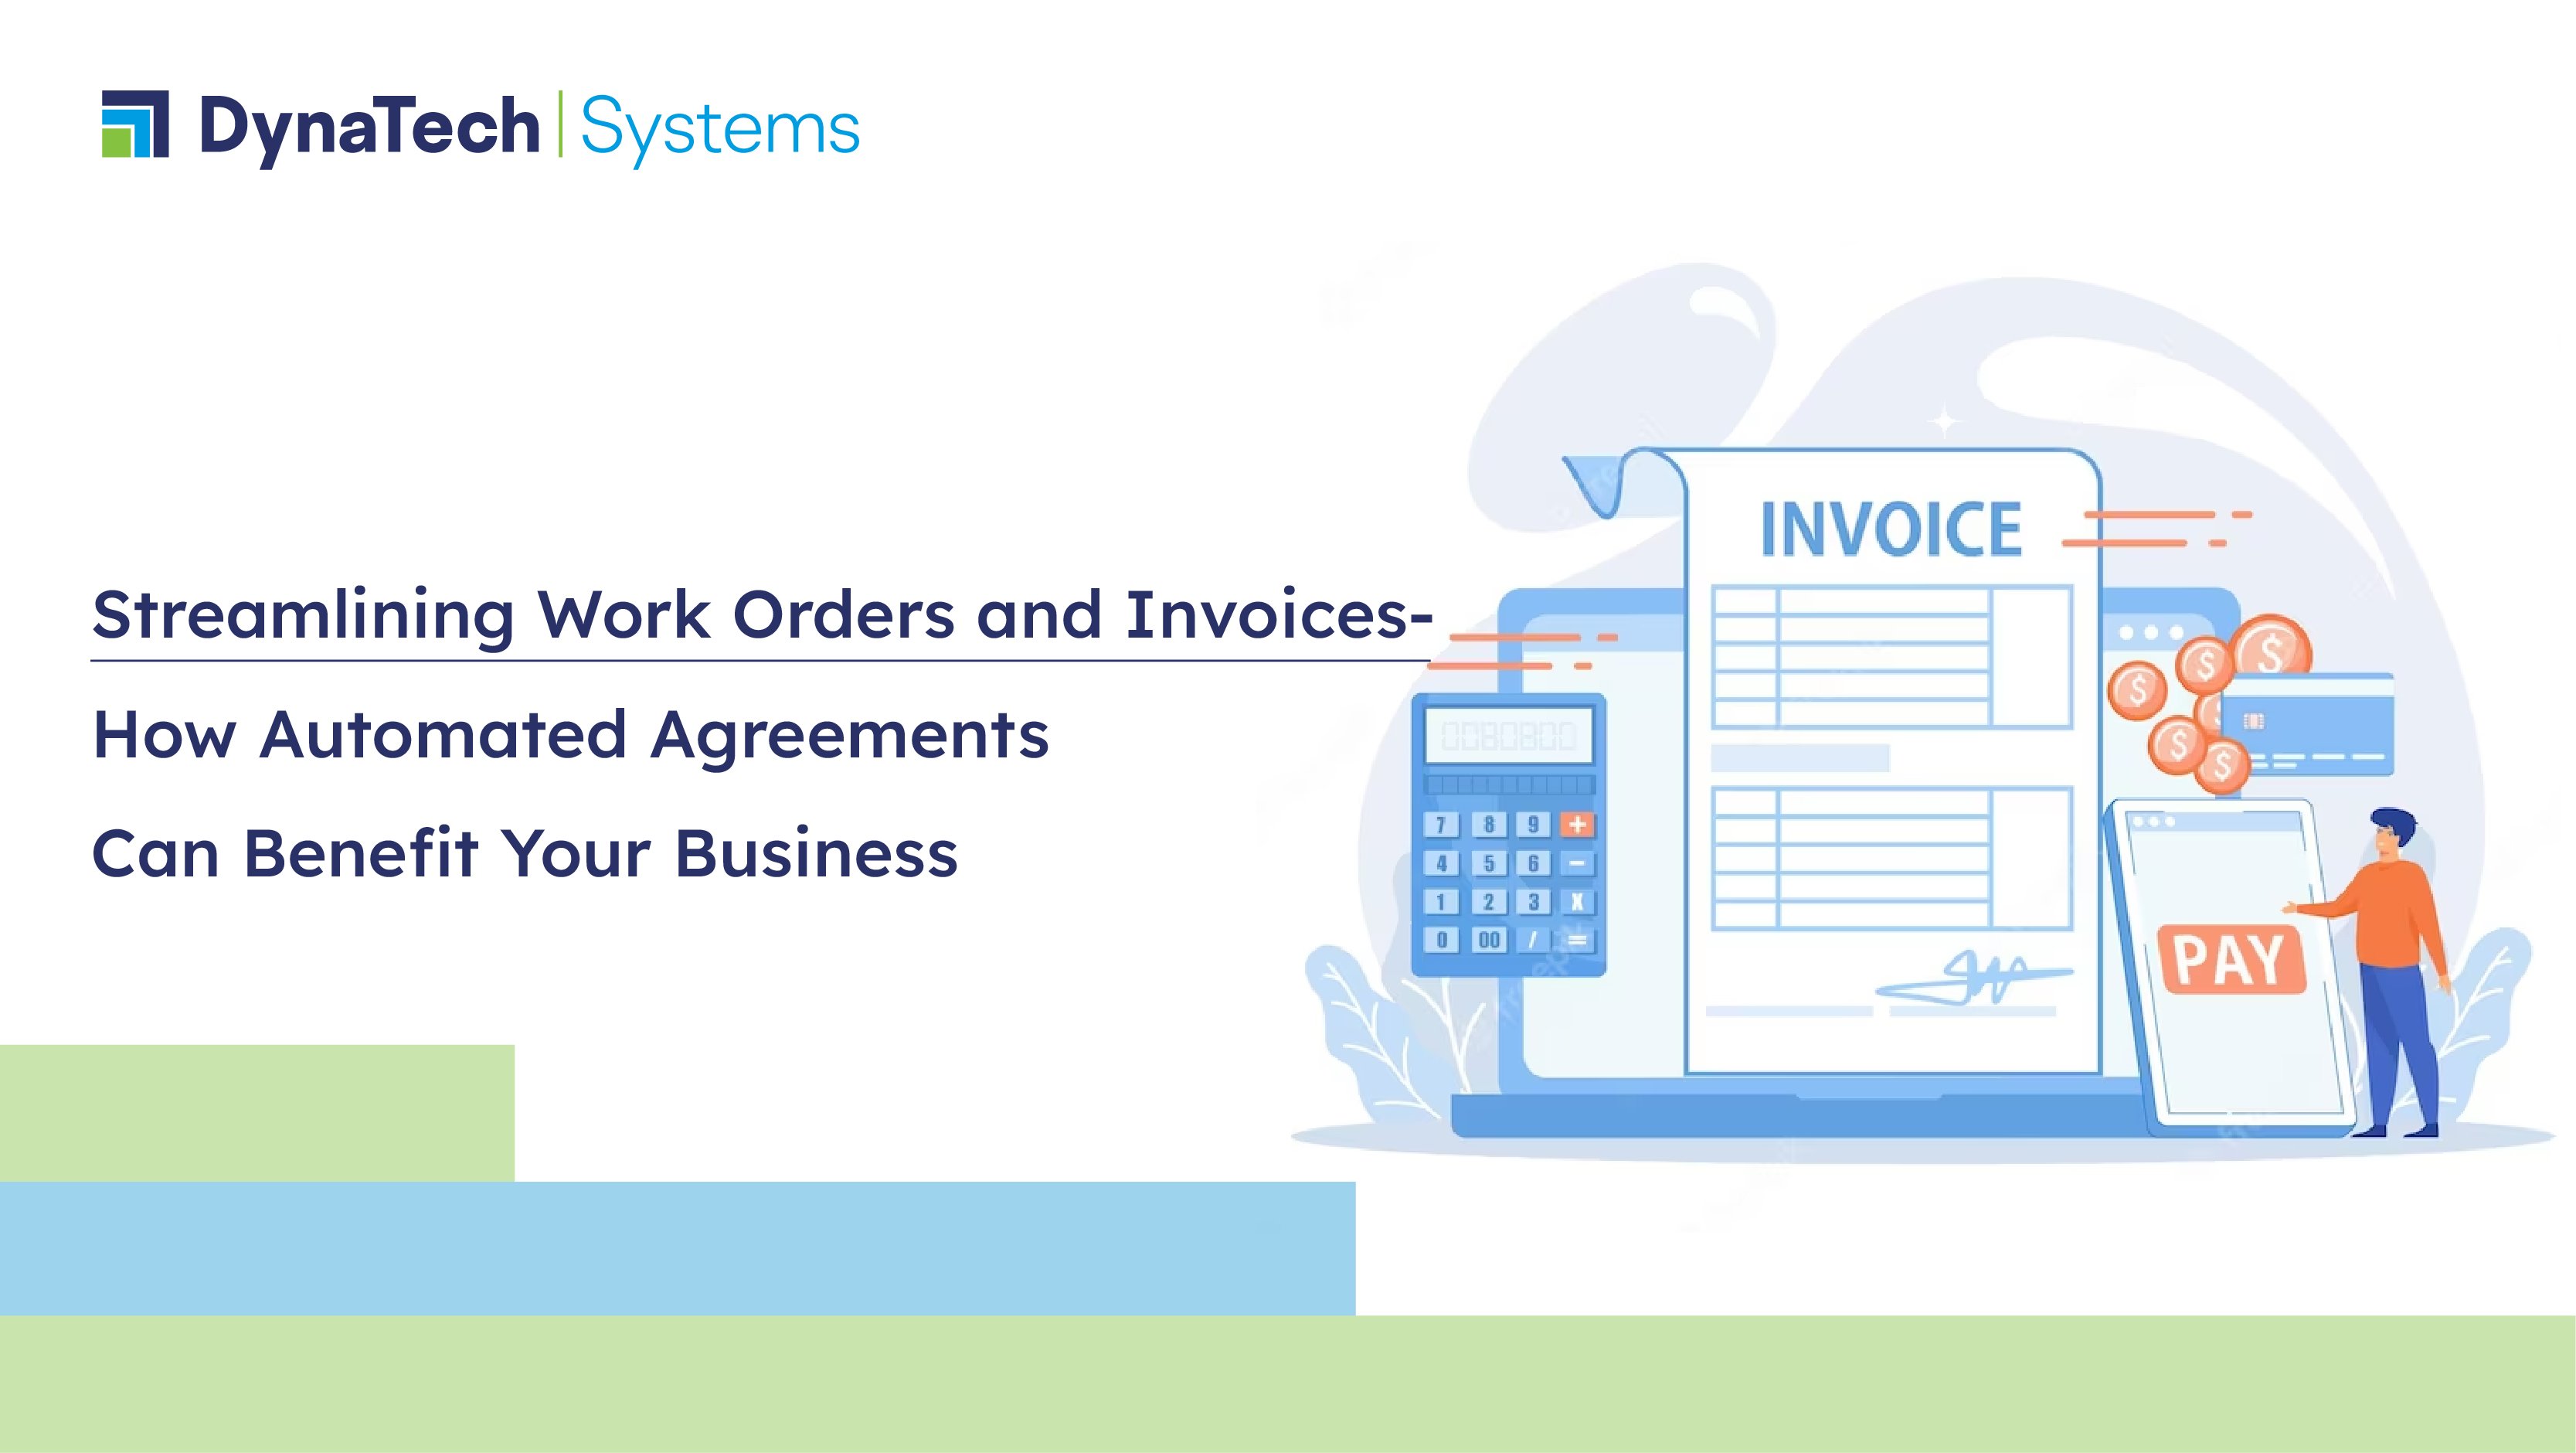 Streamlining Work Orders and Invoices- How Automated Agreements Can Benefit Your Business